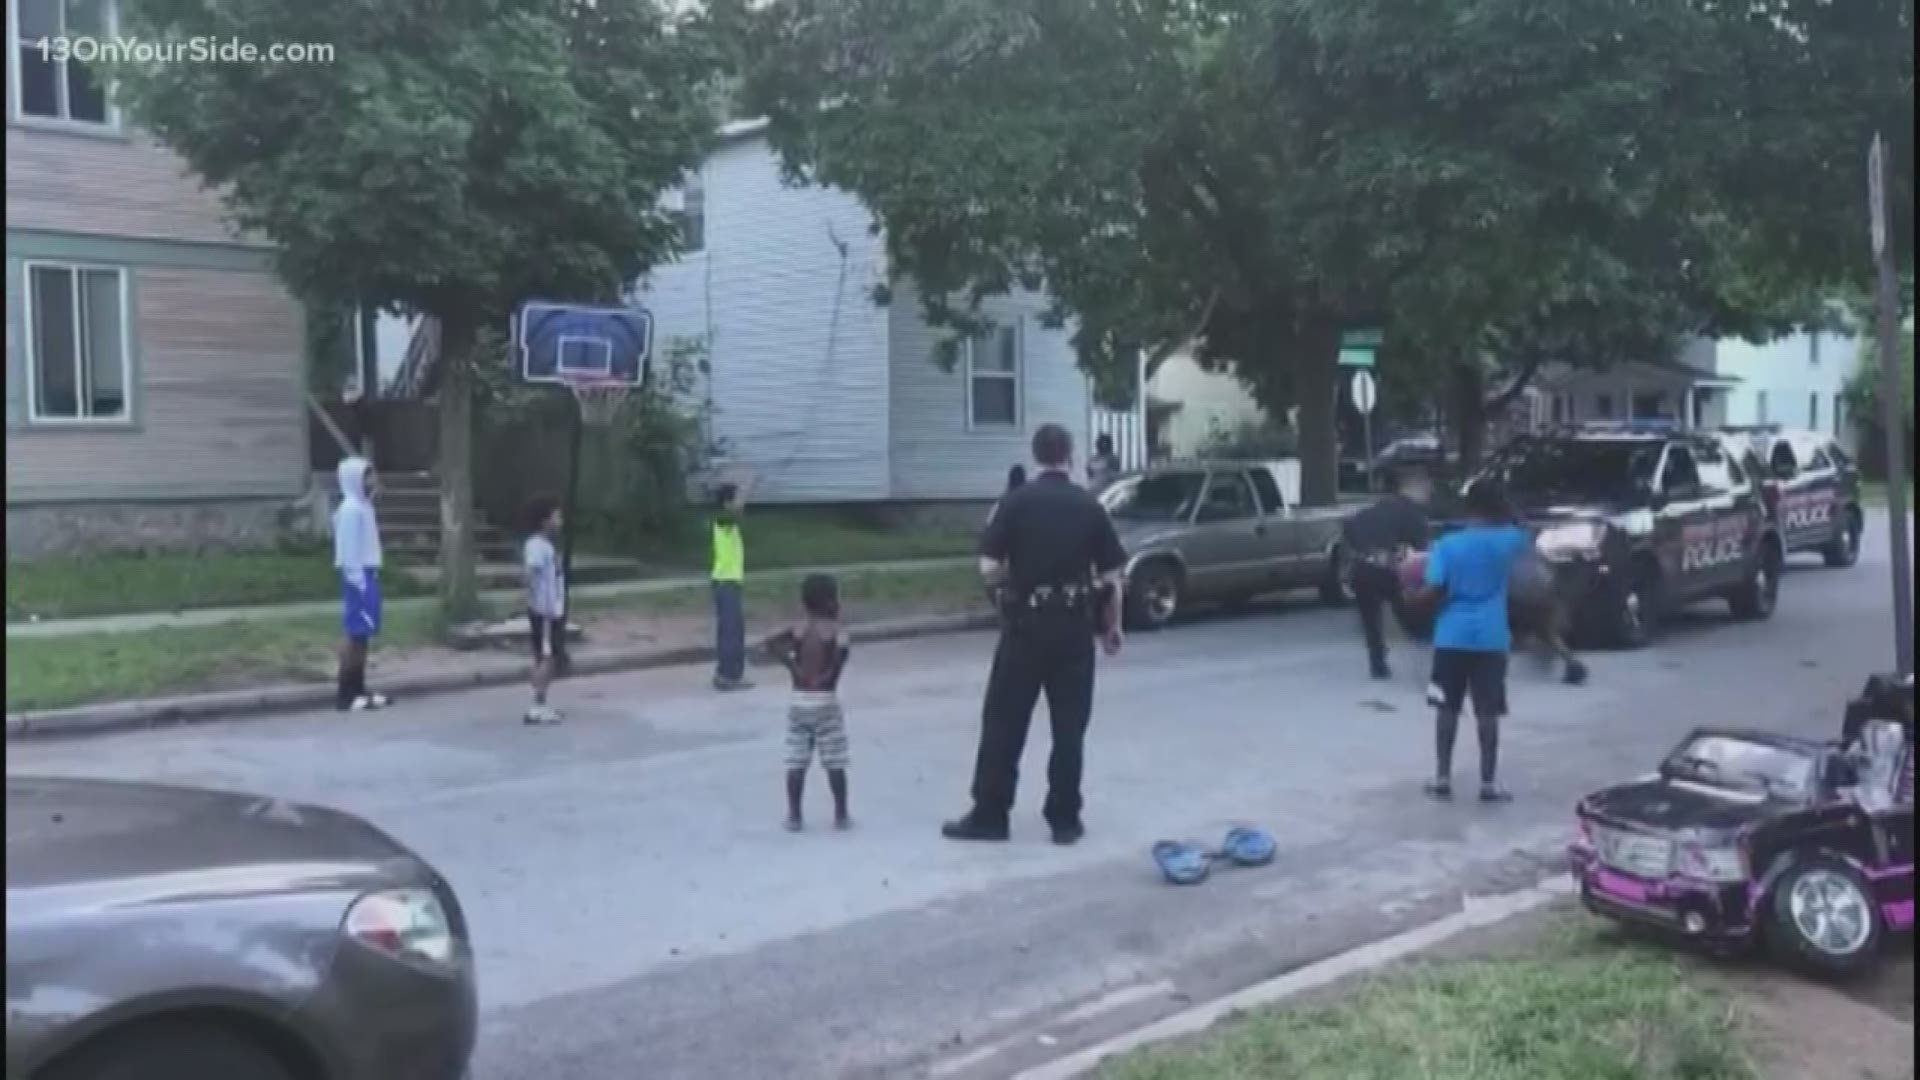 Officers from the Grand Rapids Police Department stopped by McReynolds Avenue to shoot some hoops with local kids.